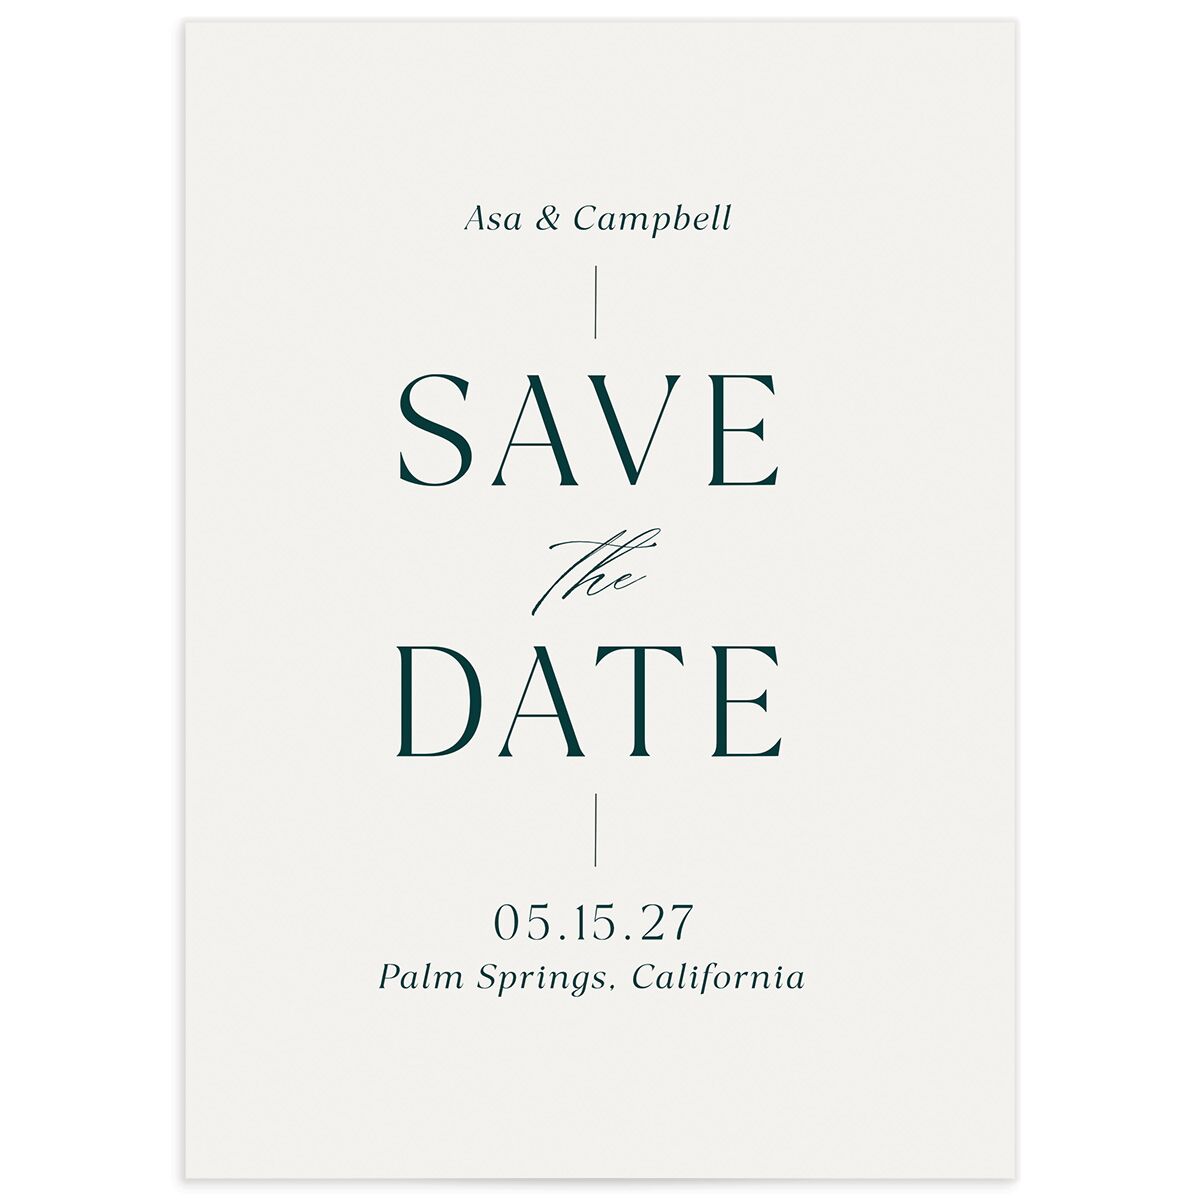 wedding-save-the-dates-elegant-to-rustic-designs-the-knot